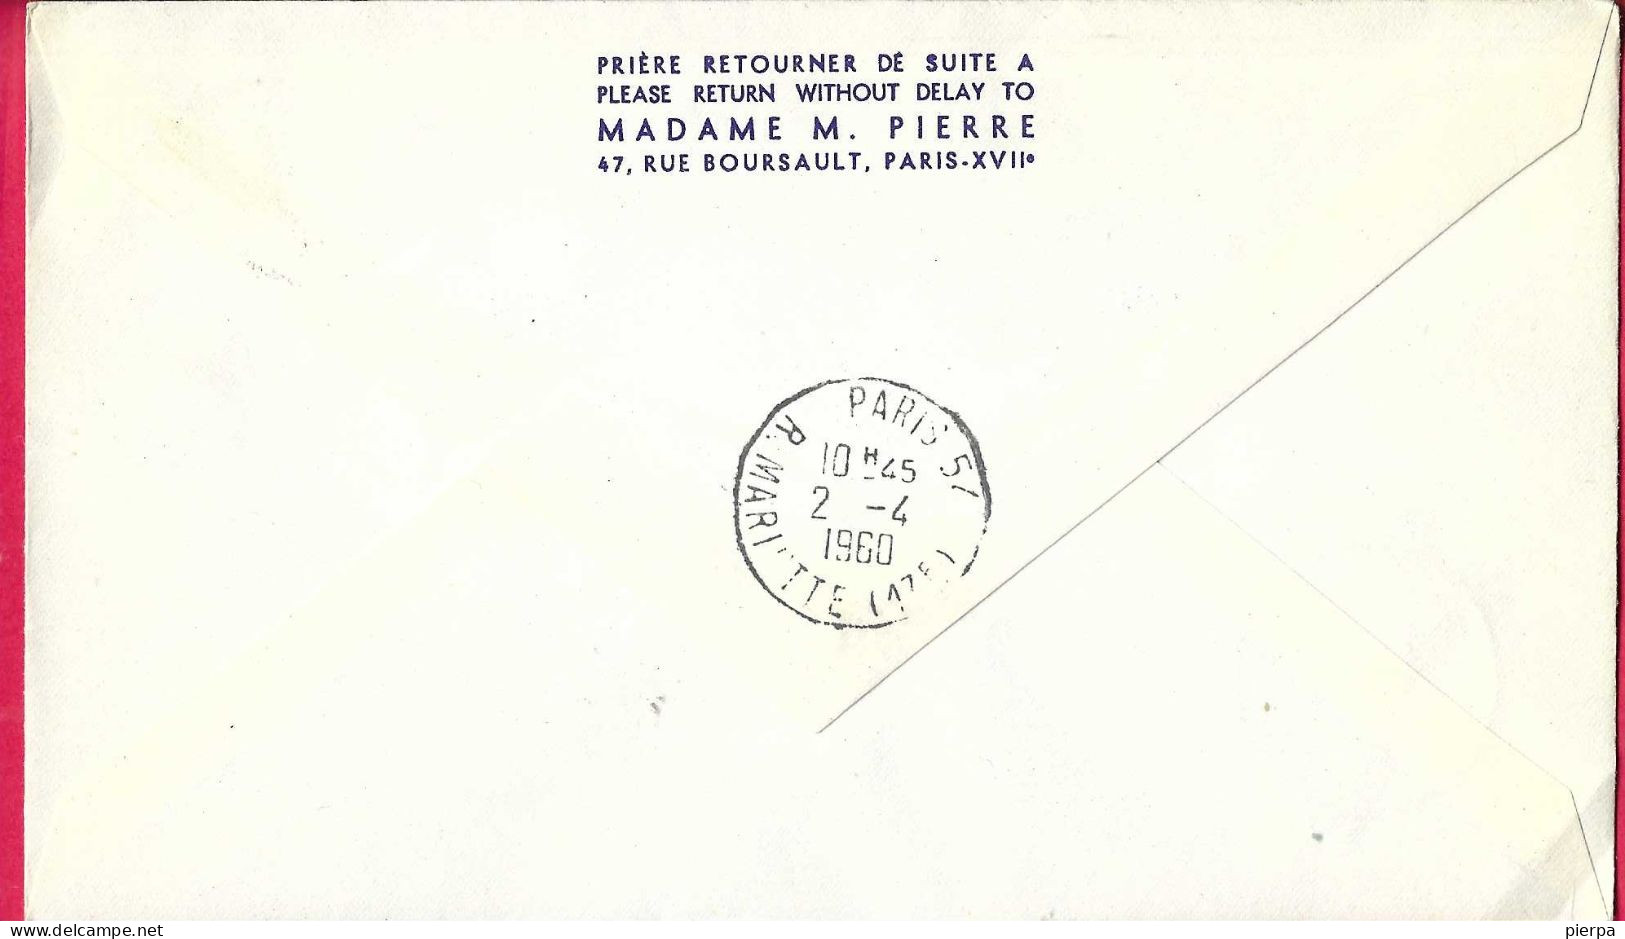 SVERIGE - FIRST CARAVELLE FLIGHT AIR FRANCE FROM STOCKHOLM TO PARIS *1.4.1960* ON OFFICIAL COVER - Storia Postale